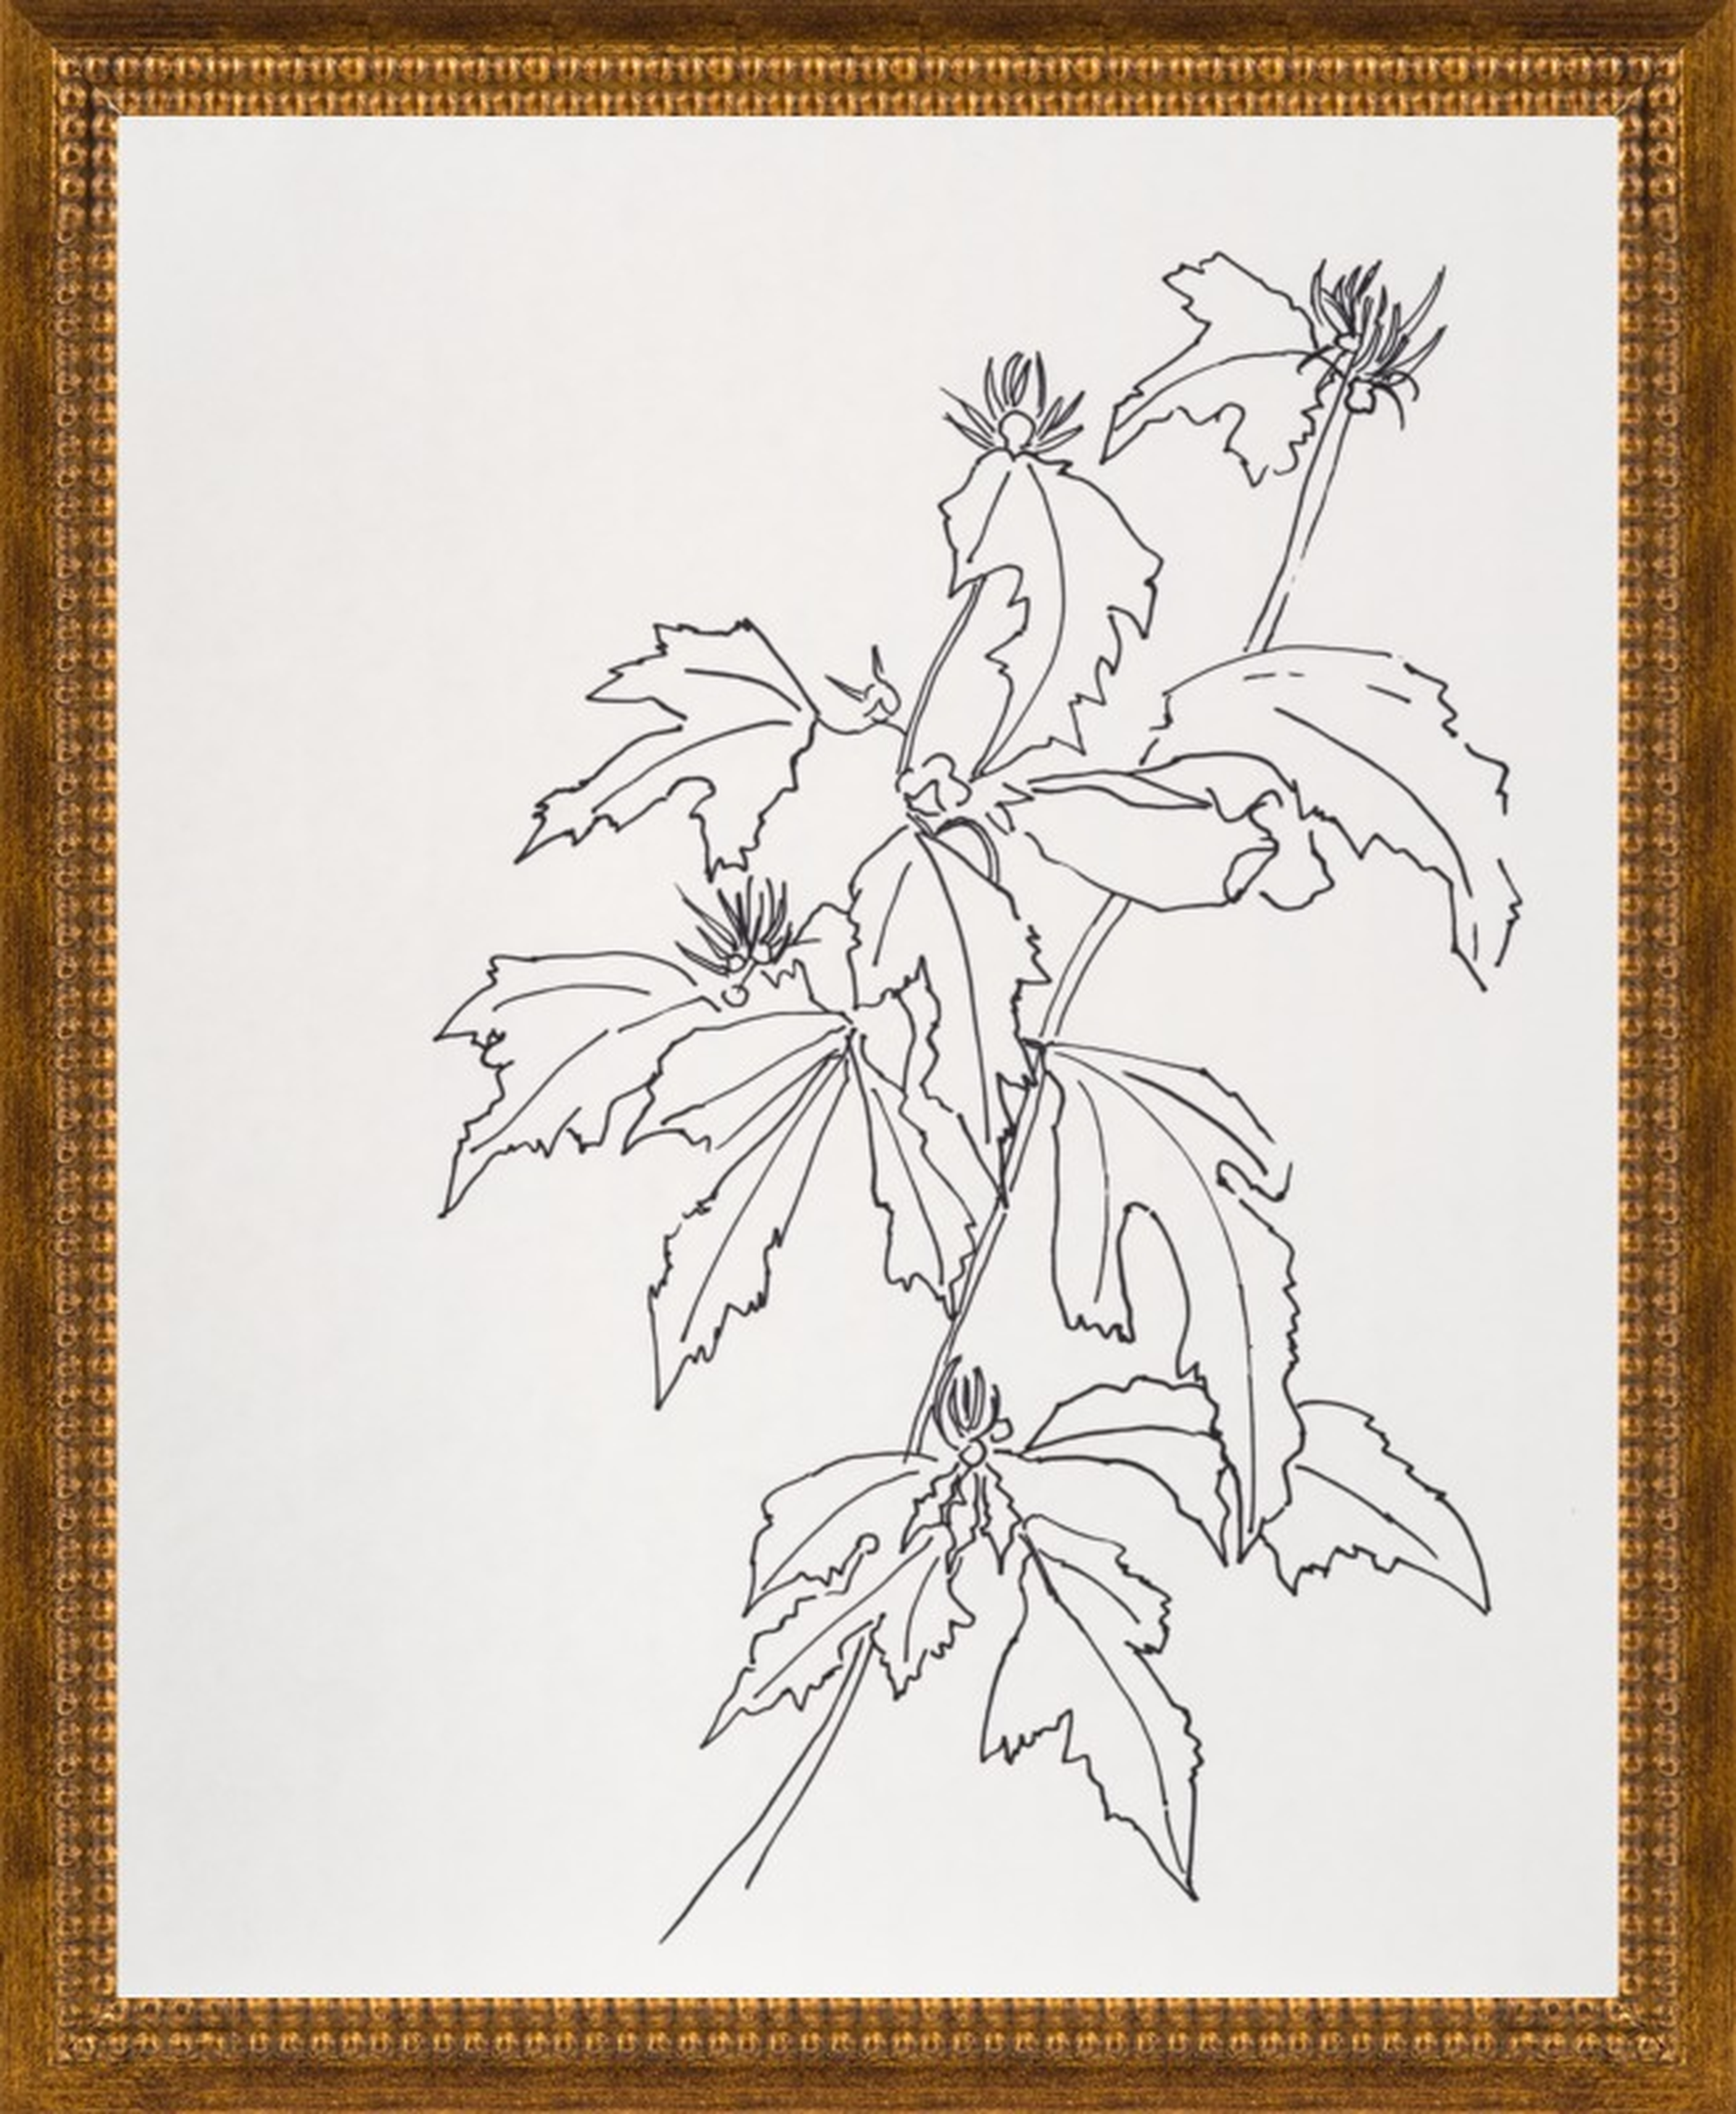 Leaves Rose of Sharon by Casey Chalem Anderson for Artfully Walls - Artfully Walls